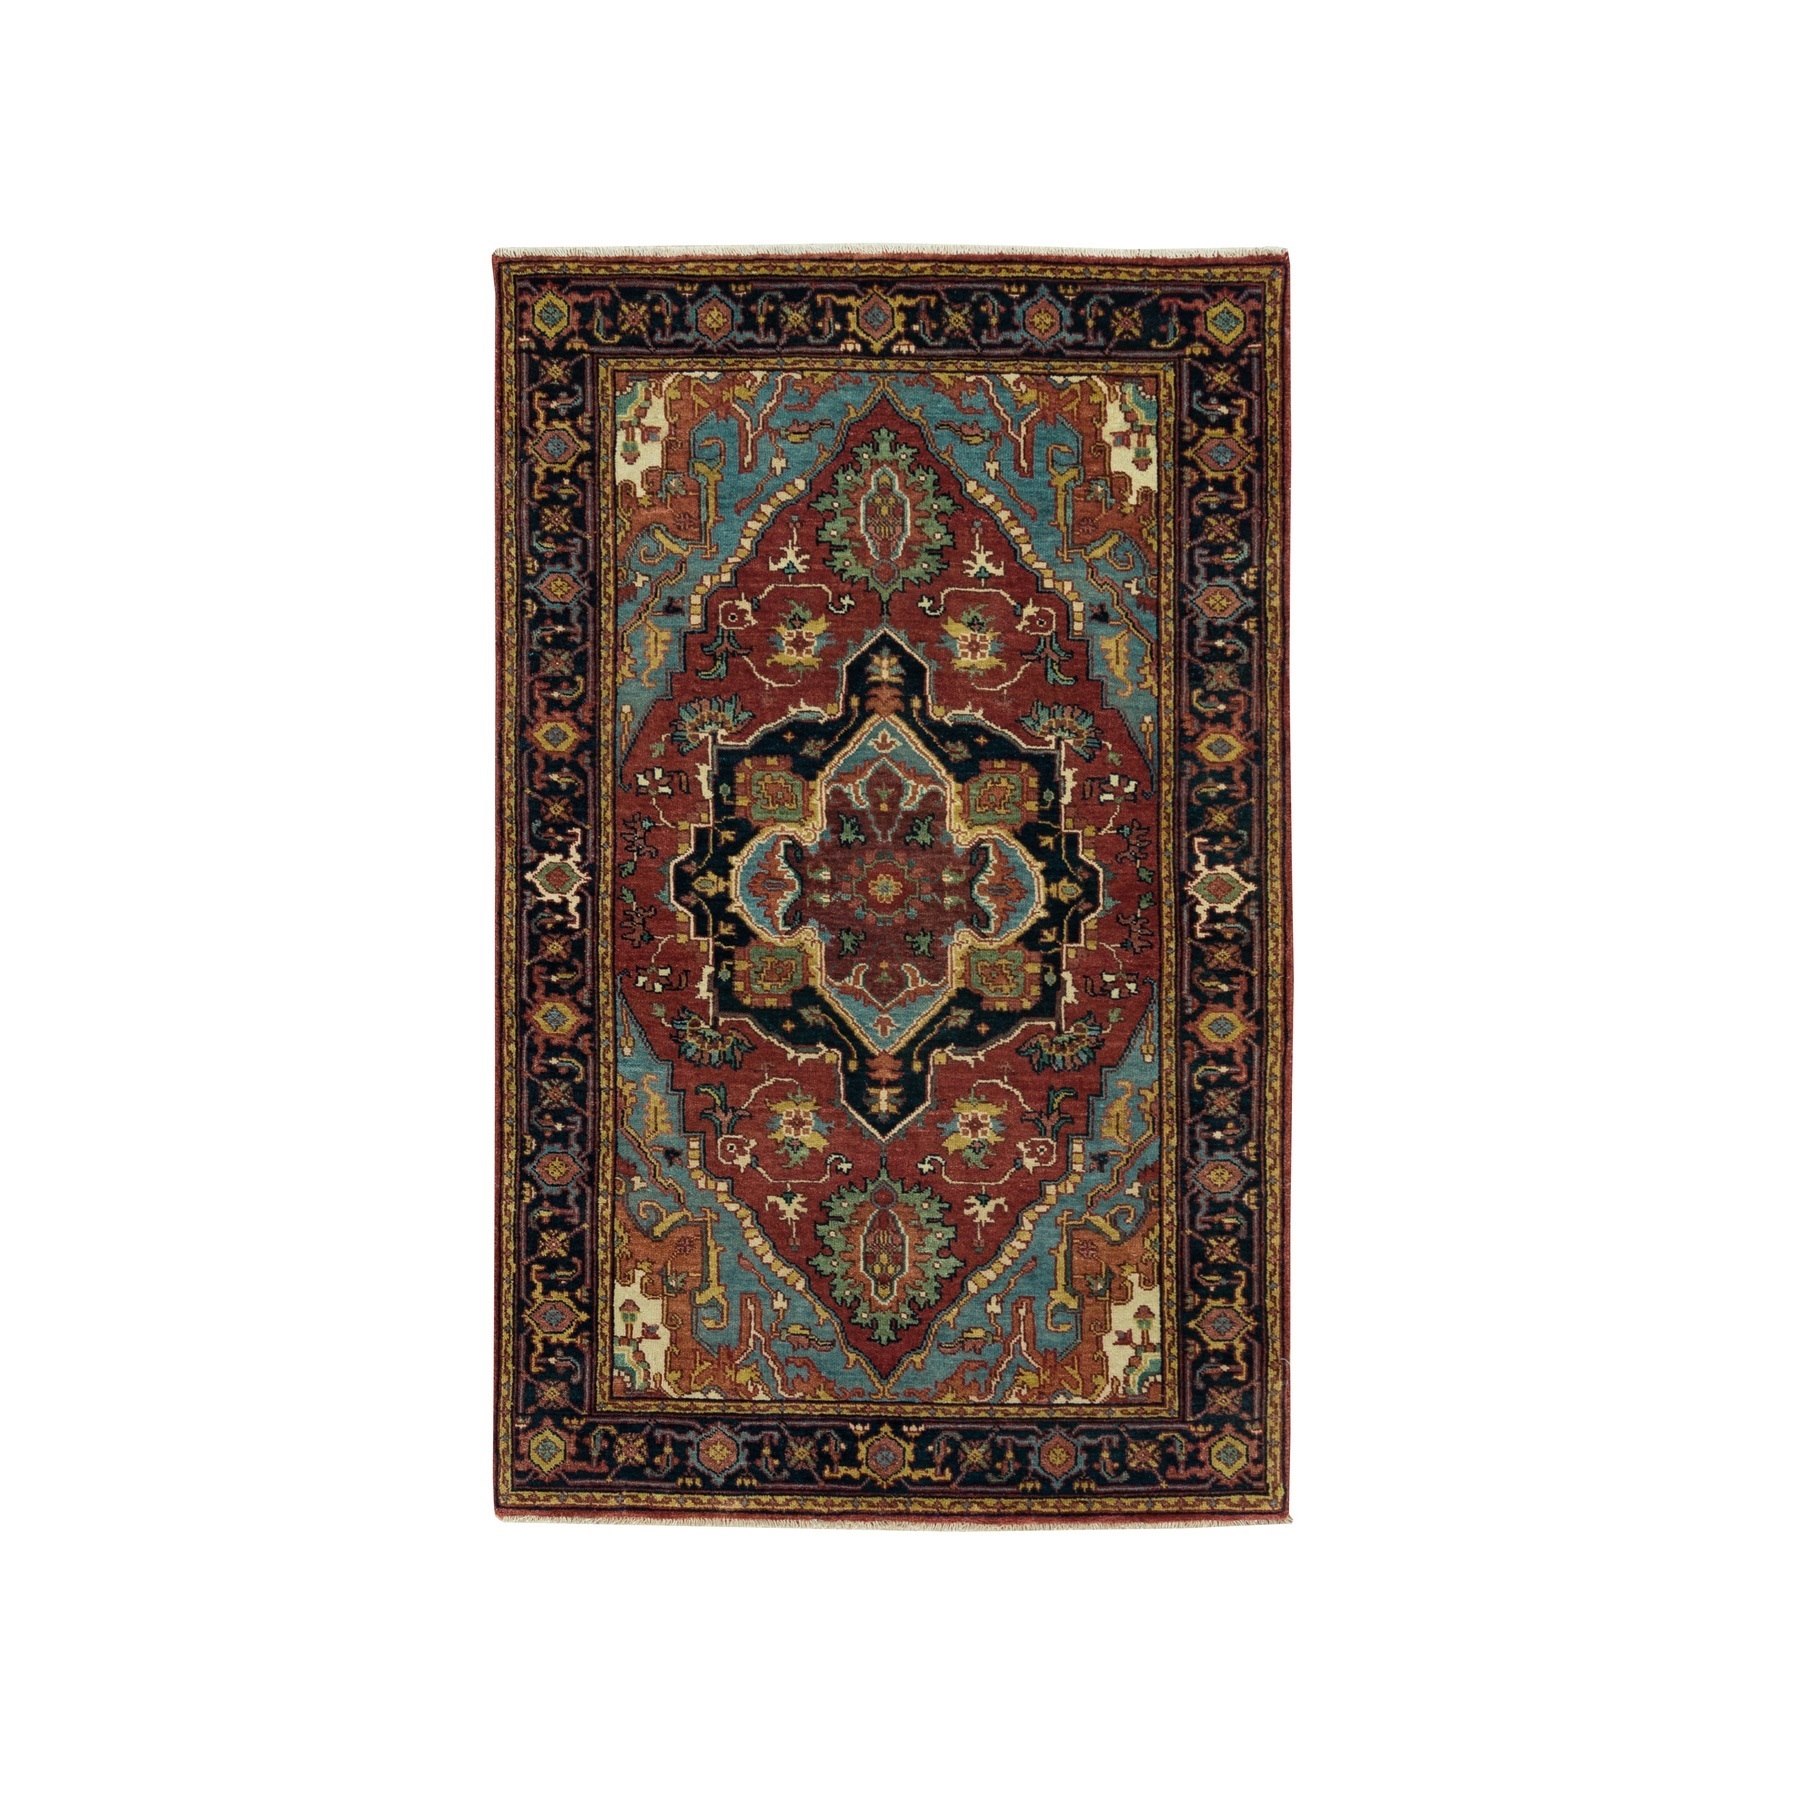 3'1"x5'3" Falu Red with Yankees Blue, Pure Wool, Hand Woven, Antiqued Fine Heriz Re-Creation, Densely Woven Natural Dyes, Soft and Lush, Oriental Rug 